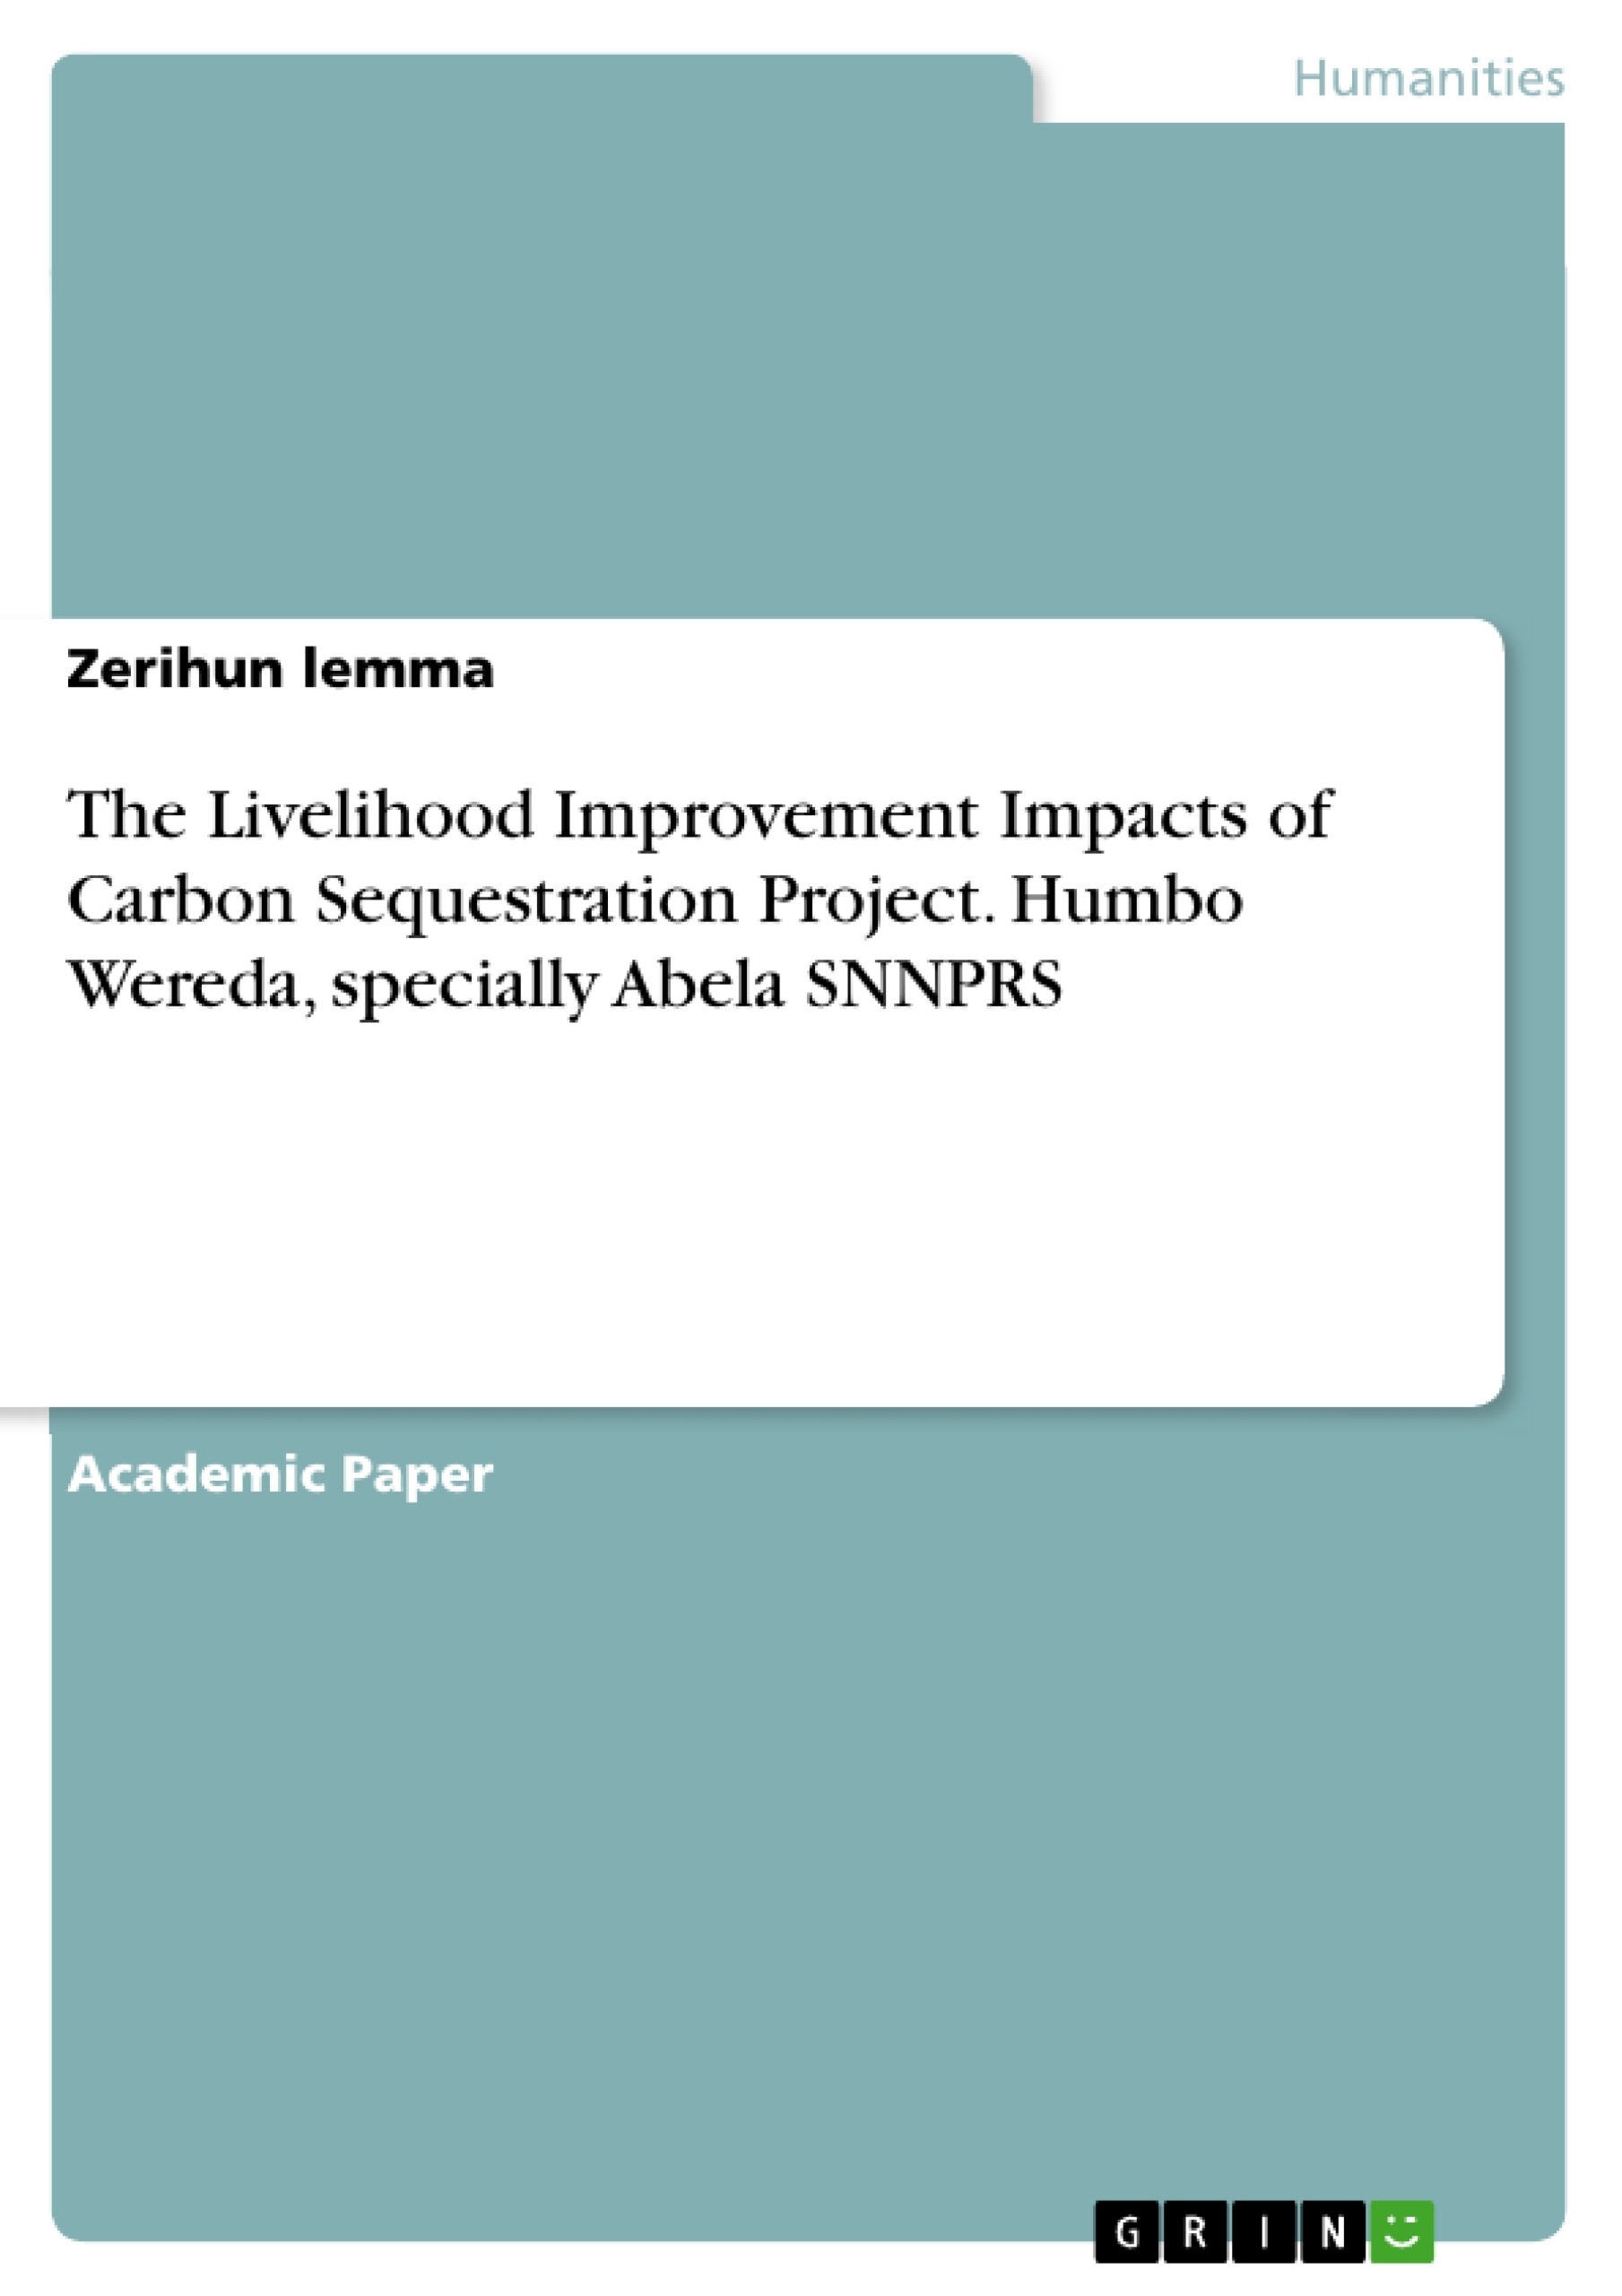 Title: The Livelihood Improvement Impacts of Carbon Sequestration Project. Humbo Wereda, specially Abela SNNPRS